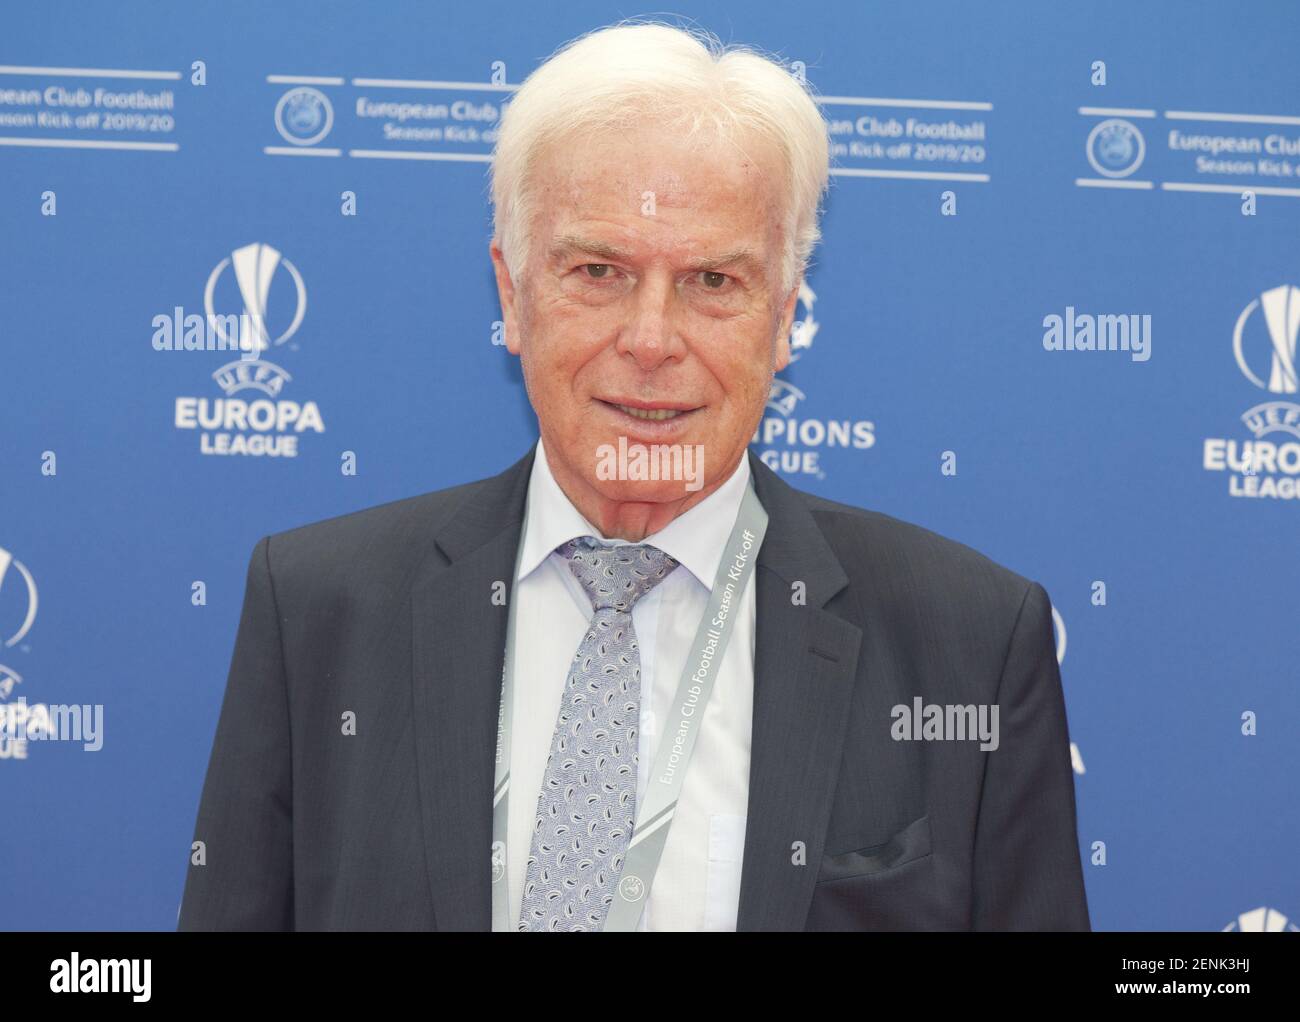 Monaco, Monte Carlo - August 29, 2019: UEFA Champions League Group Stage Draw and Player of the Year Awards, Season Kick Off 2019-2020 with Journalist Rainer Holzschuh. (Photo by Mandoga Media/Sipa USA) Stock Photo